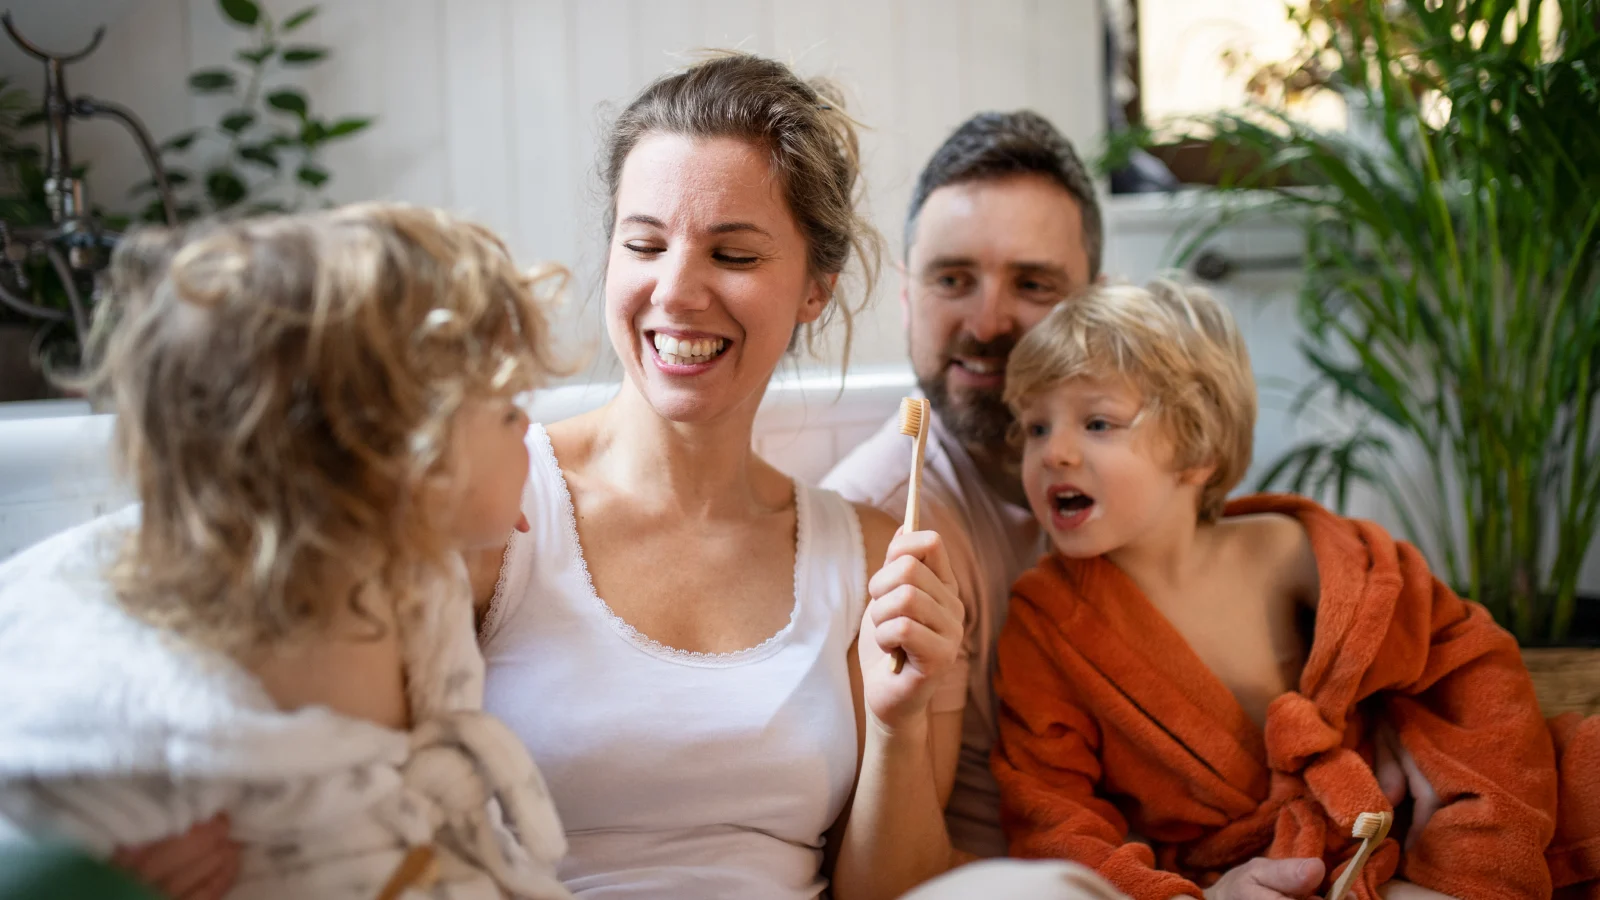 An Ounce of Prevention: The link between preventive dental care, better oral health, and overall wellness - Parents smiling with children on the couch 